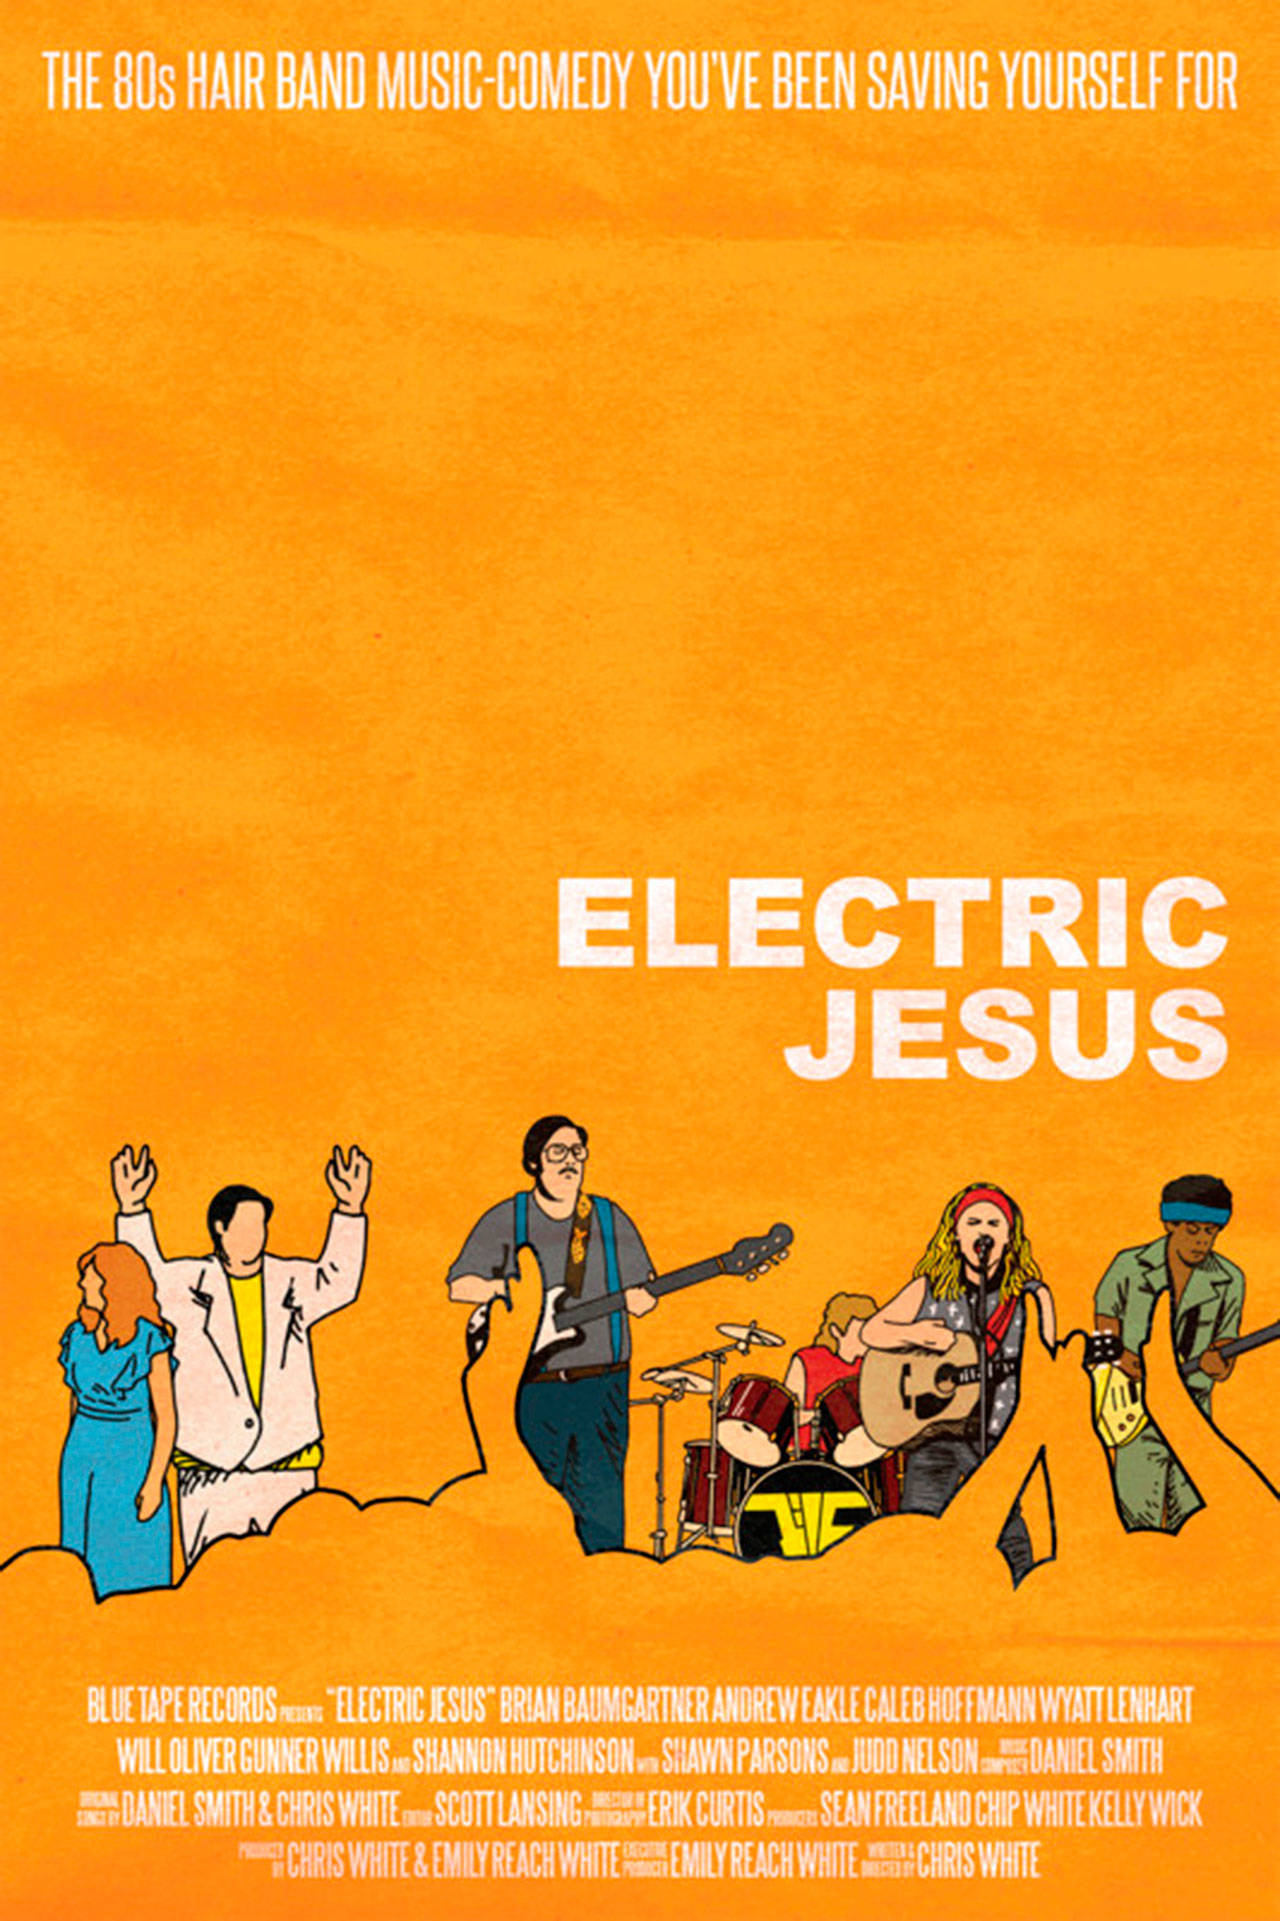 Poster for the film “Electric Jesus,” directed by Chris White. (Courtesy of Amy Camp)